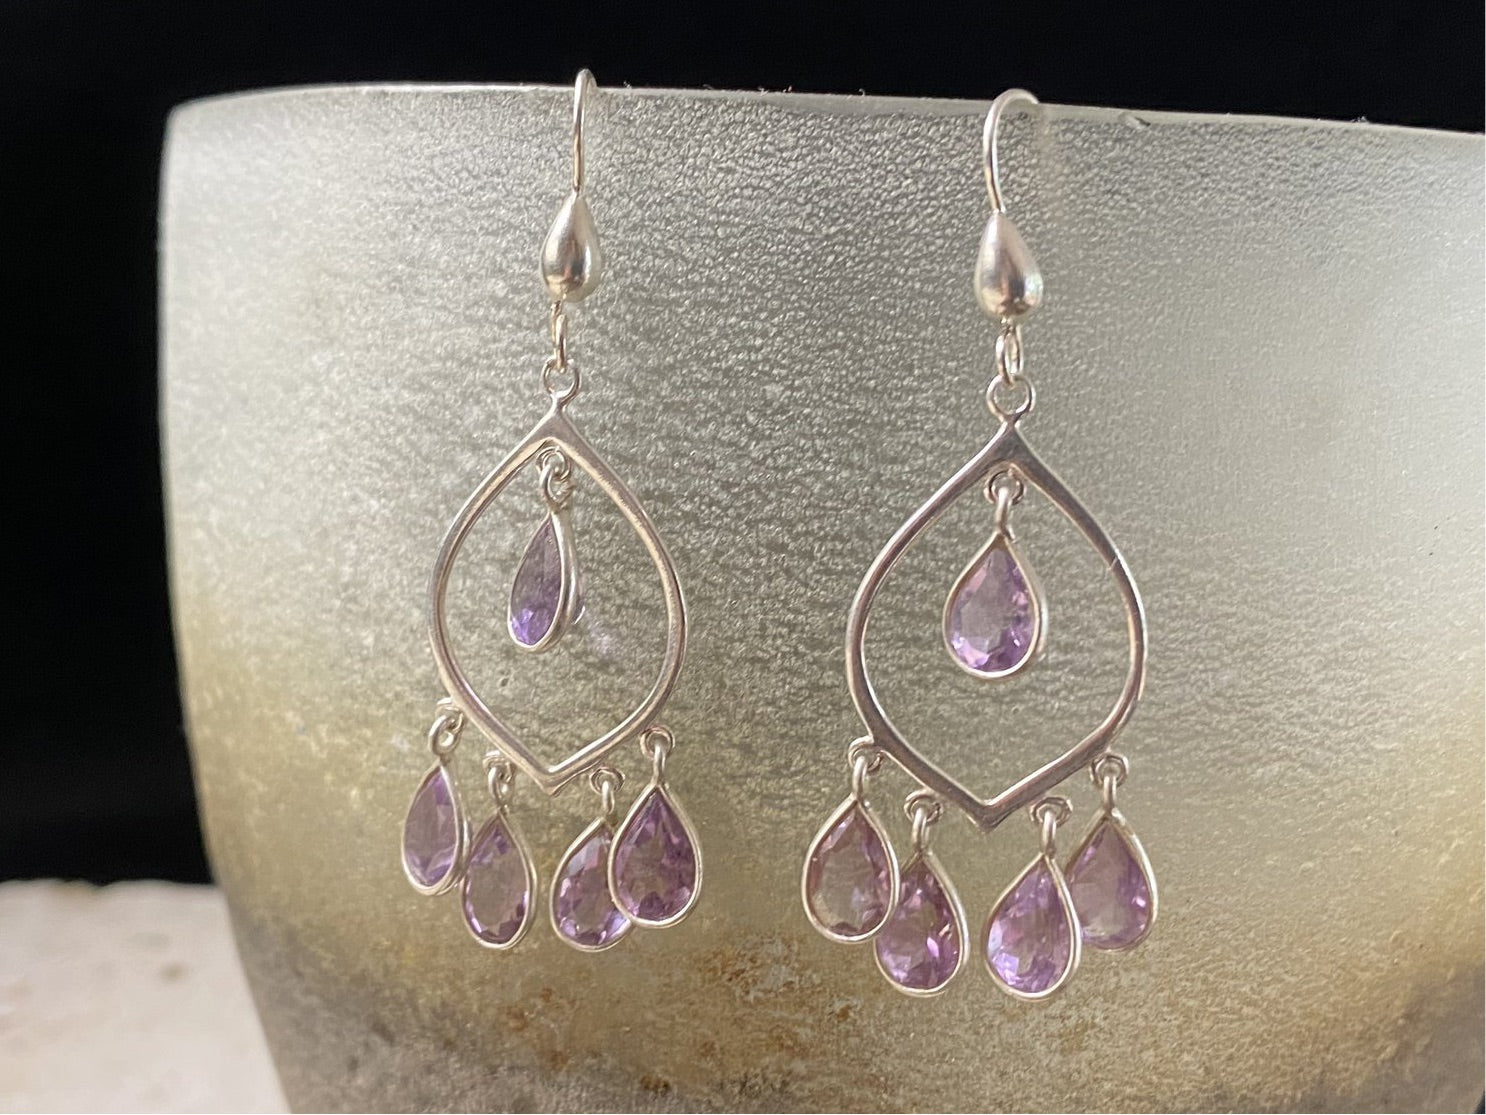 Classic amethyst drop earrings set in sterling silver, 5.2 cm length, lightweight and easy to wear